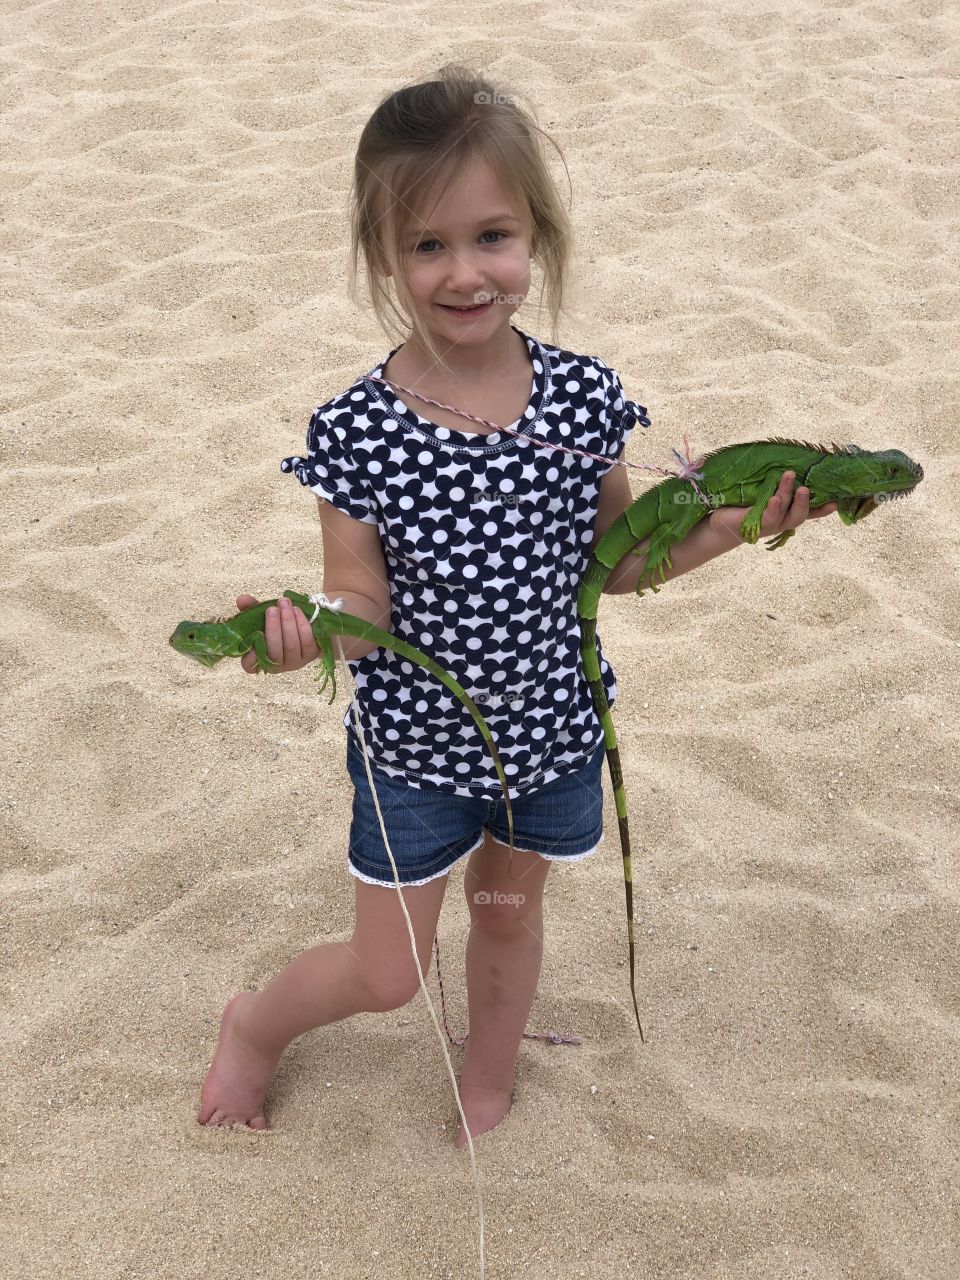 Little girl standing in the sand holding green iguanas